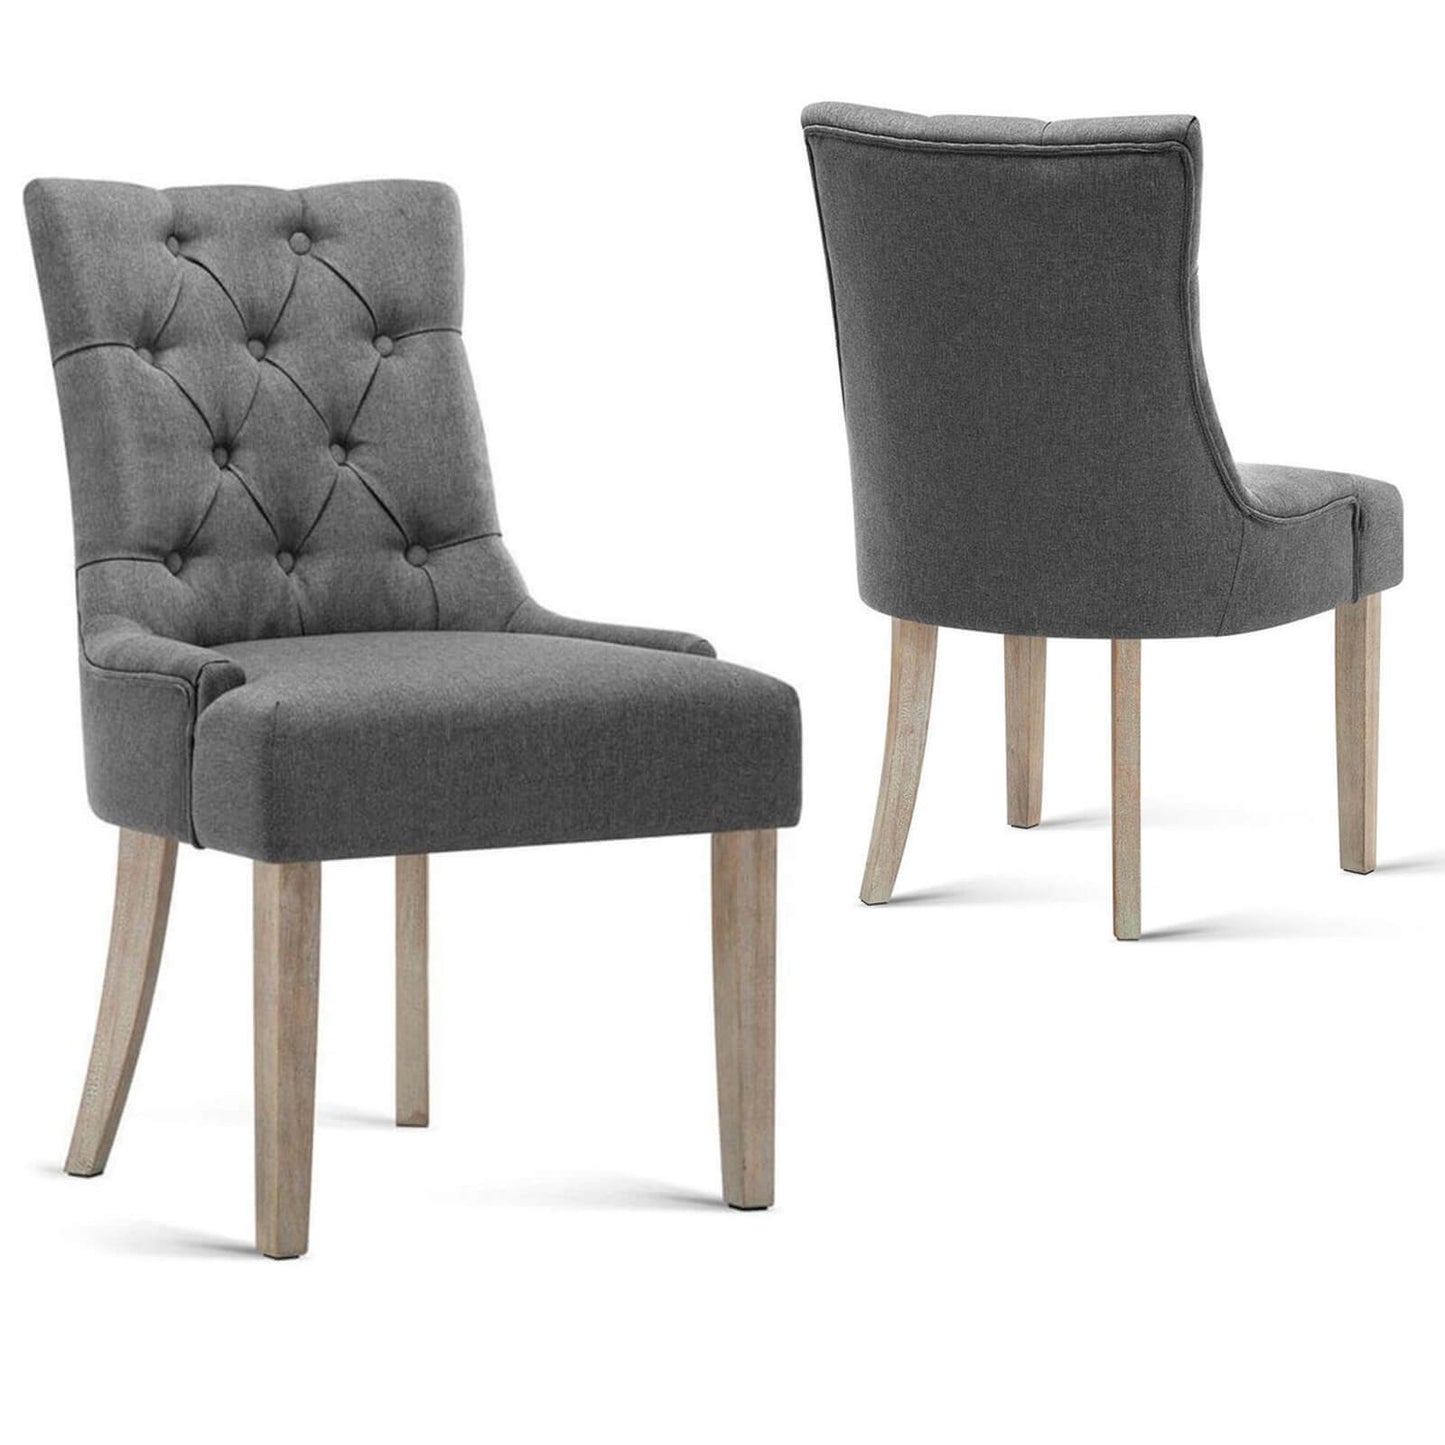 La Pyrenee | Fabric French Provincial Wooden Dining Chairs | Set Of 2 | Grey